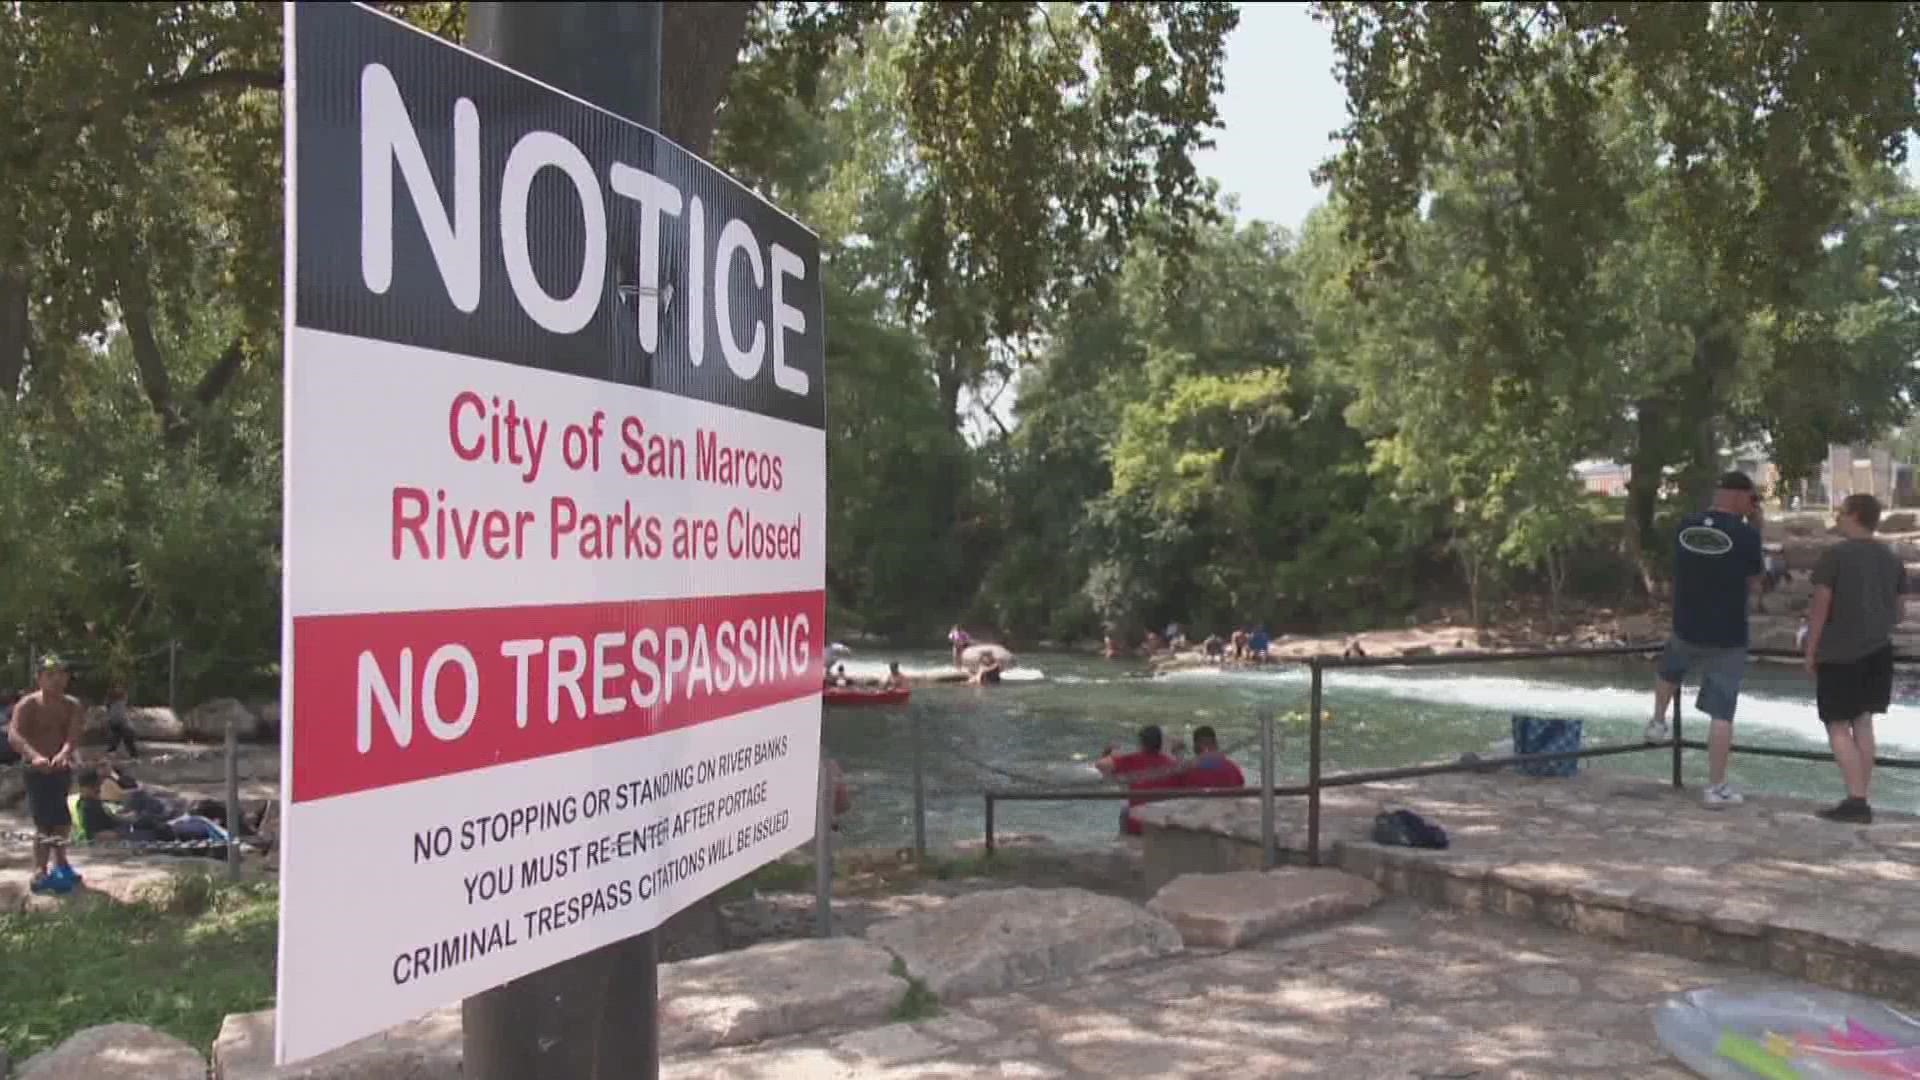 Anyone visiting San Marcos will have to pay to park near downtown.